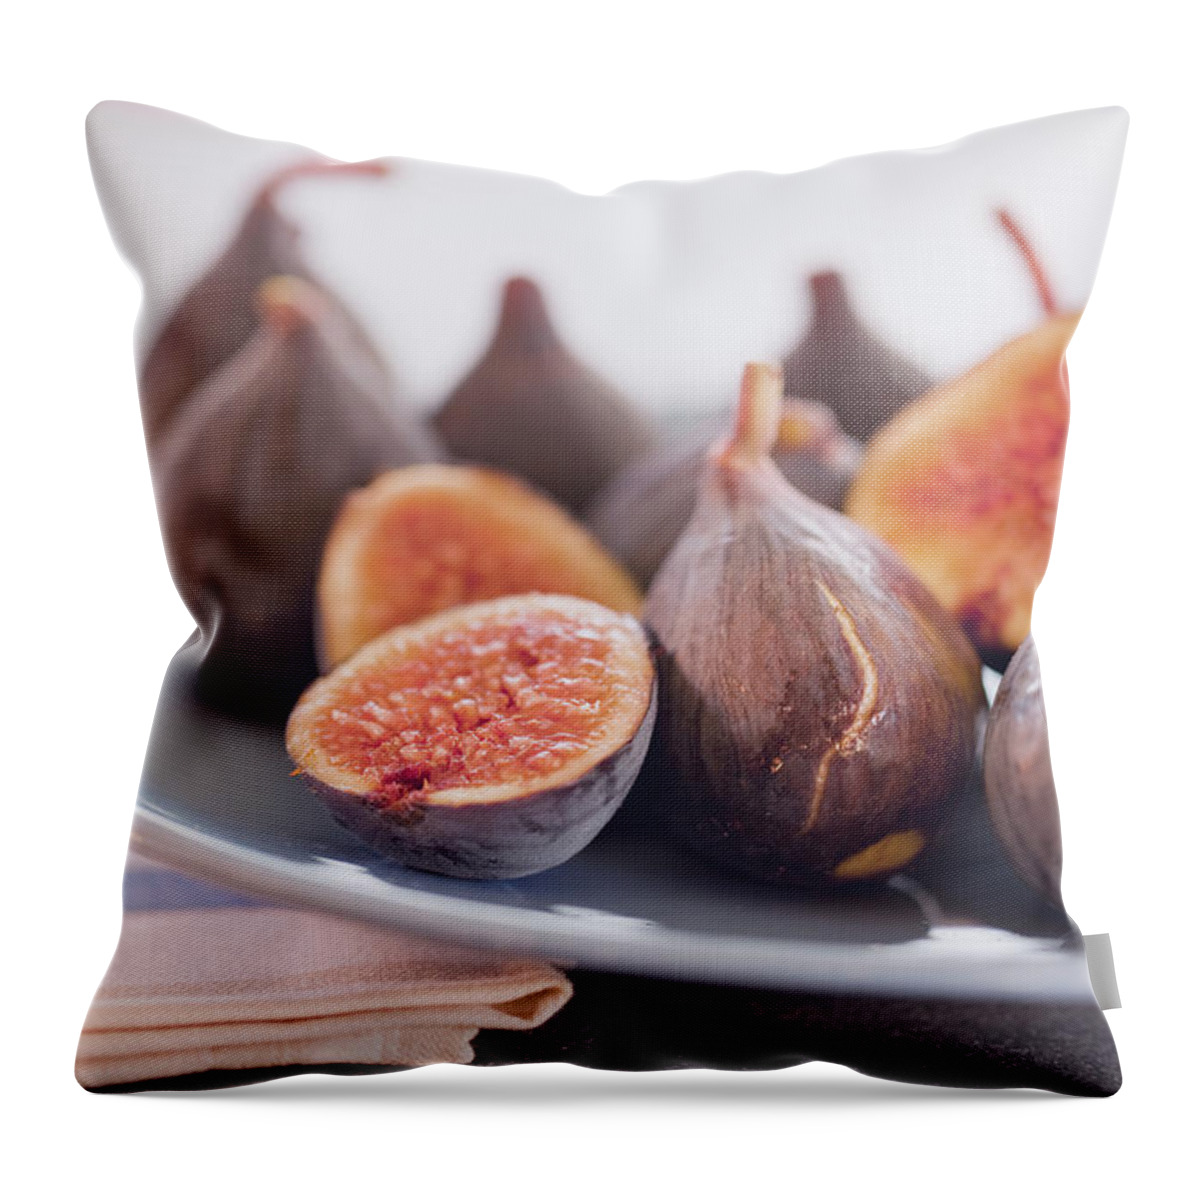 Juicy Throw Pillow featuring the photograph Blue Figs On A Plate by Ursula Alter